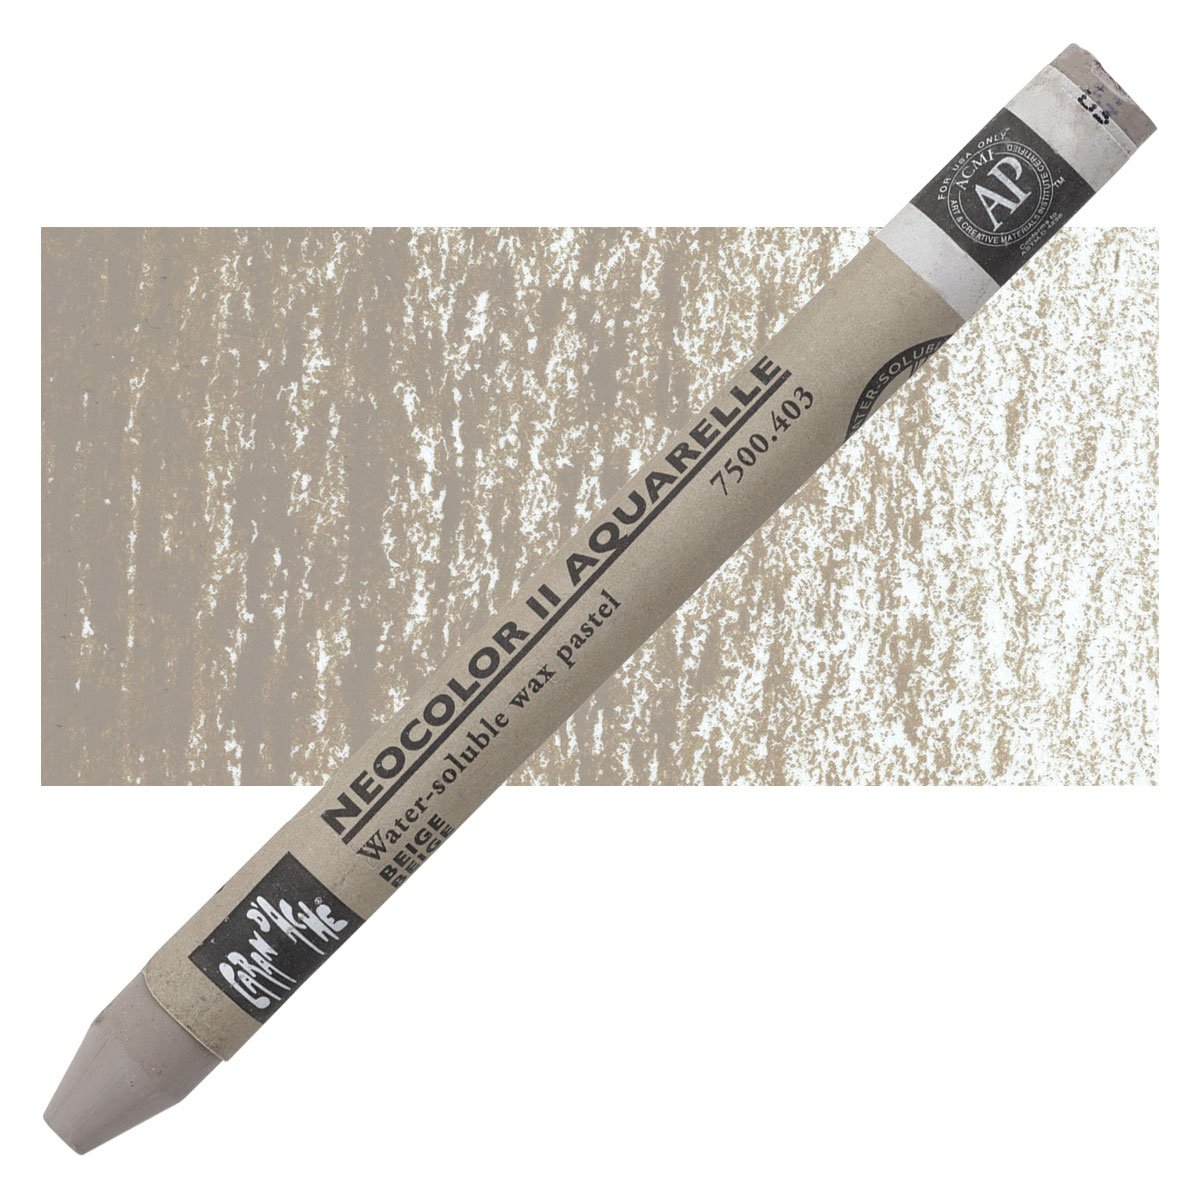  Caran D'ache Neocolor II Watersoluble Crayon 002 (7500.002) :  Artists Crayons : Arts, Crafts & Sewing